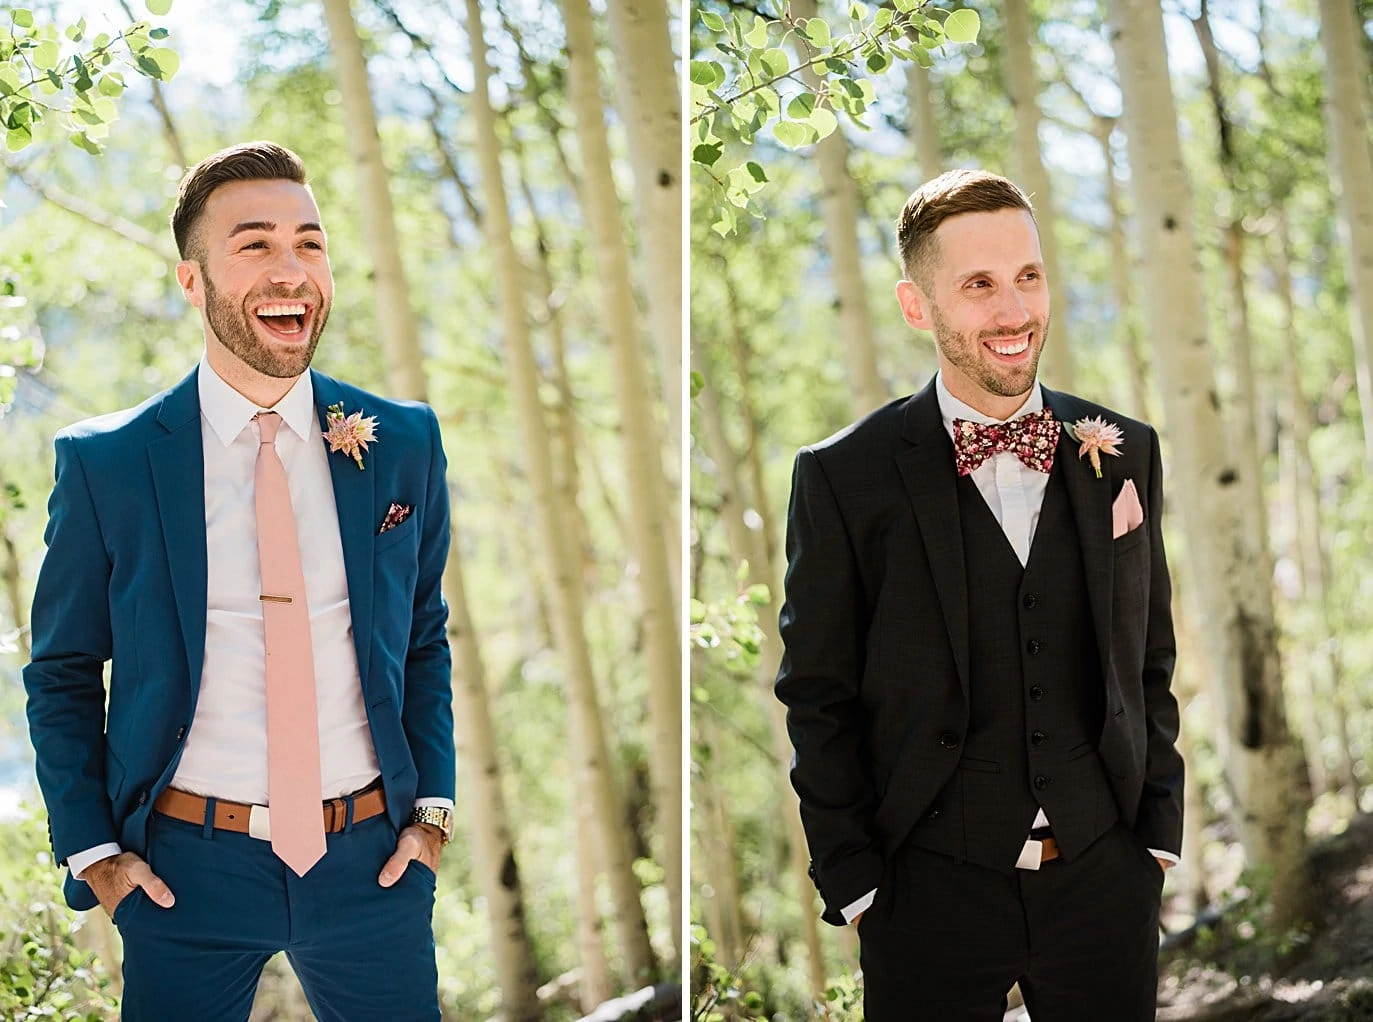 two grooms in custom suits in aspen trees before ceremony yat Boras Pass elopement by Breckenridge elopement photographer Jennie Crate